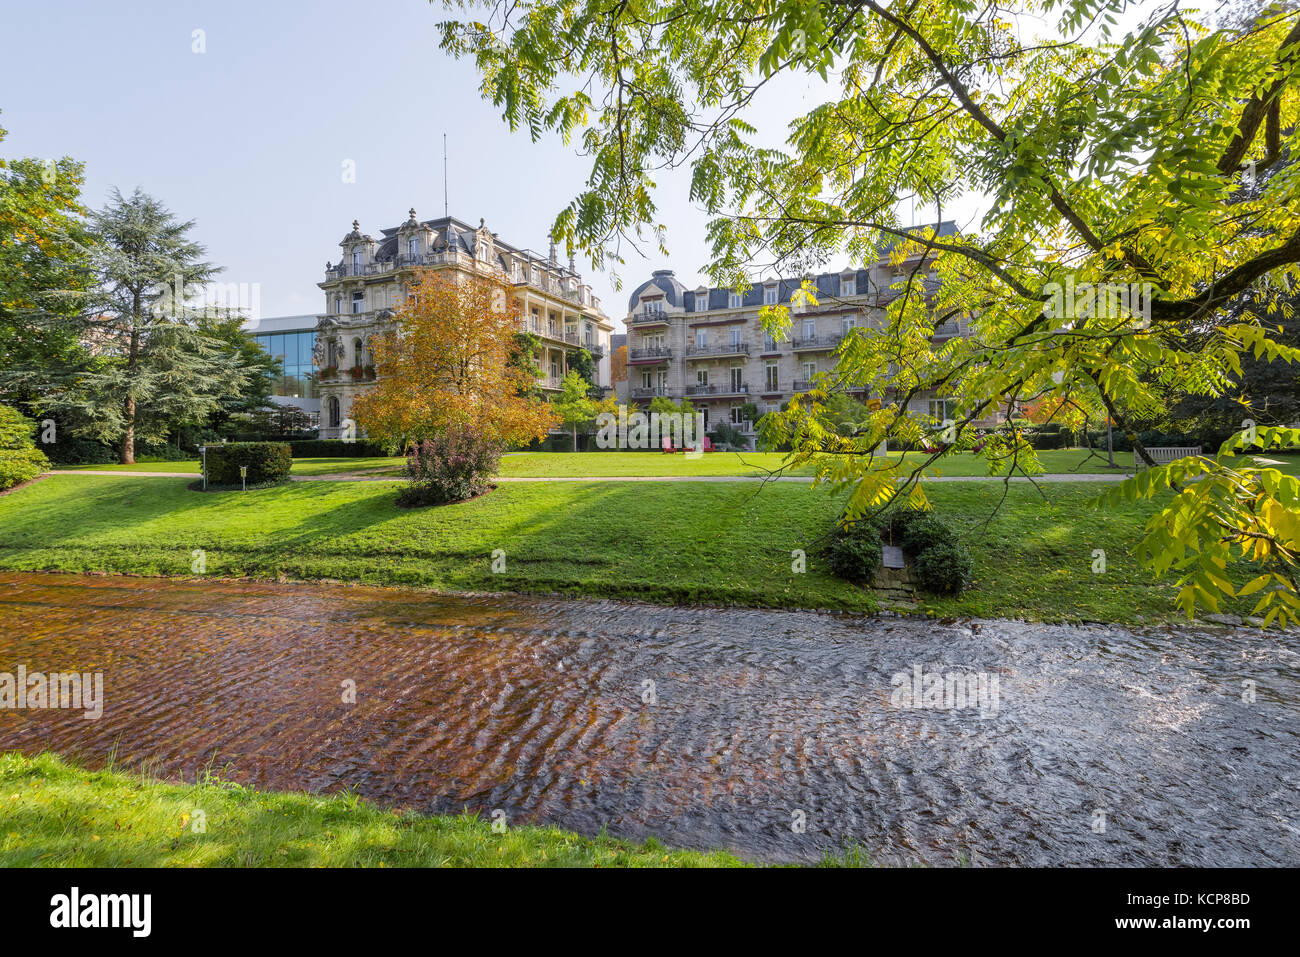 world famous hotel Brenners Parkhotel at the river Oos, spa park and arboretum at the Lichtentaler Allee in Baden-Baden, Black Forest, Germany Stock Photo